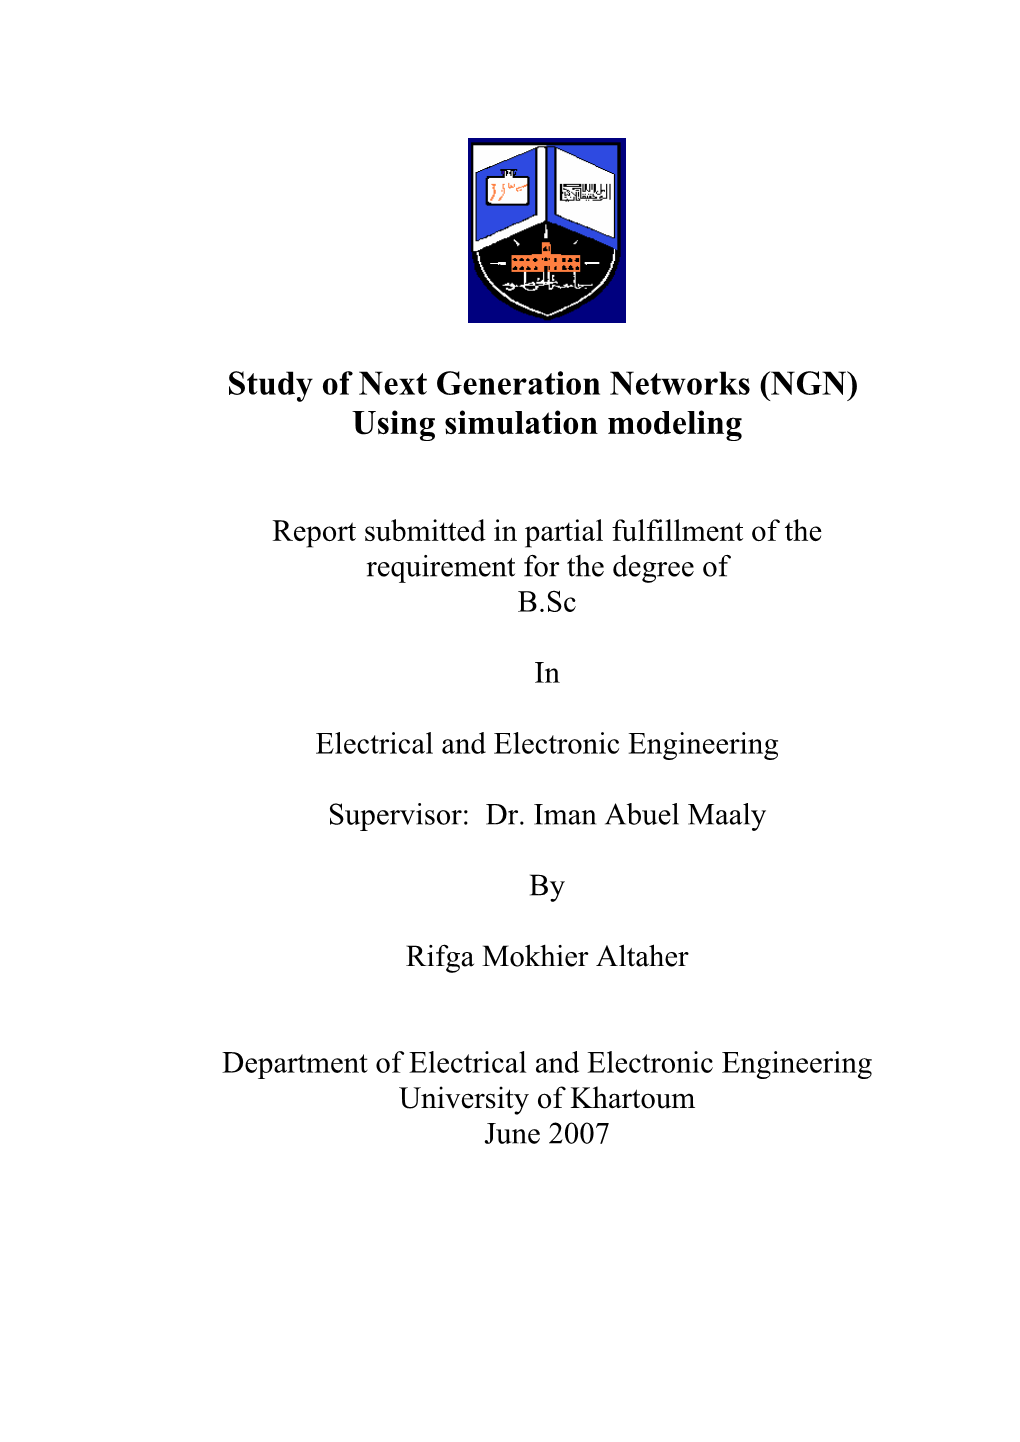 Study of Next Generation Networks (NGN) Using Simulation Modeling